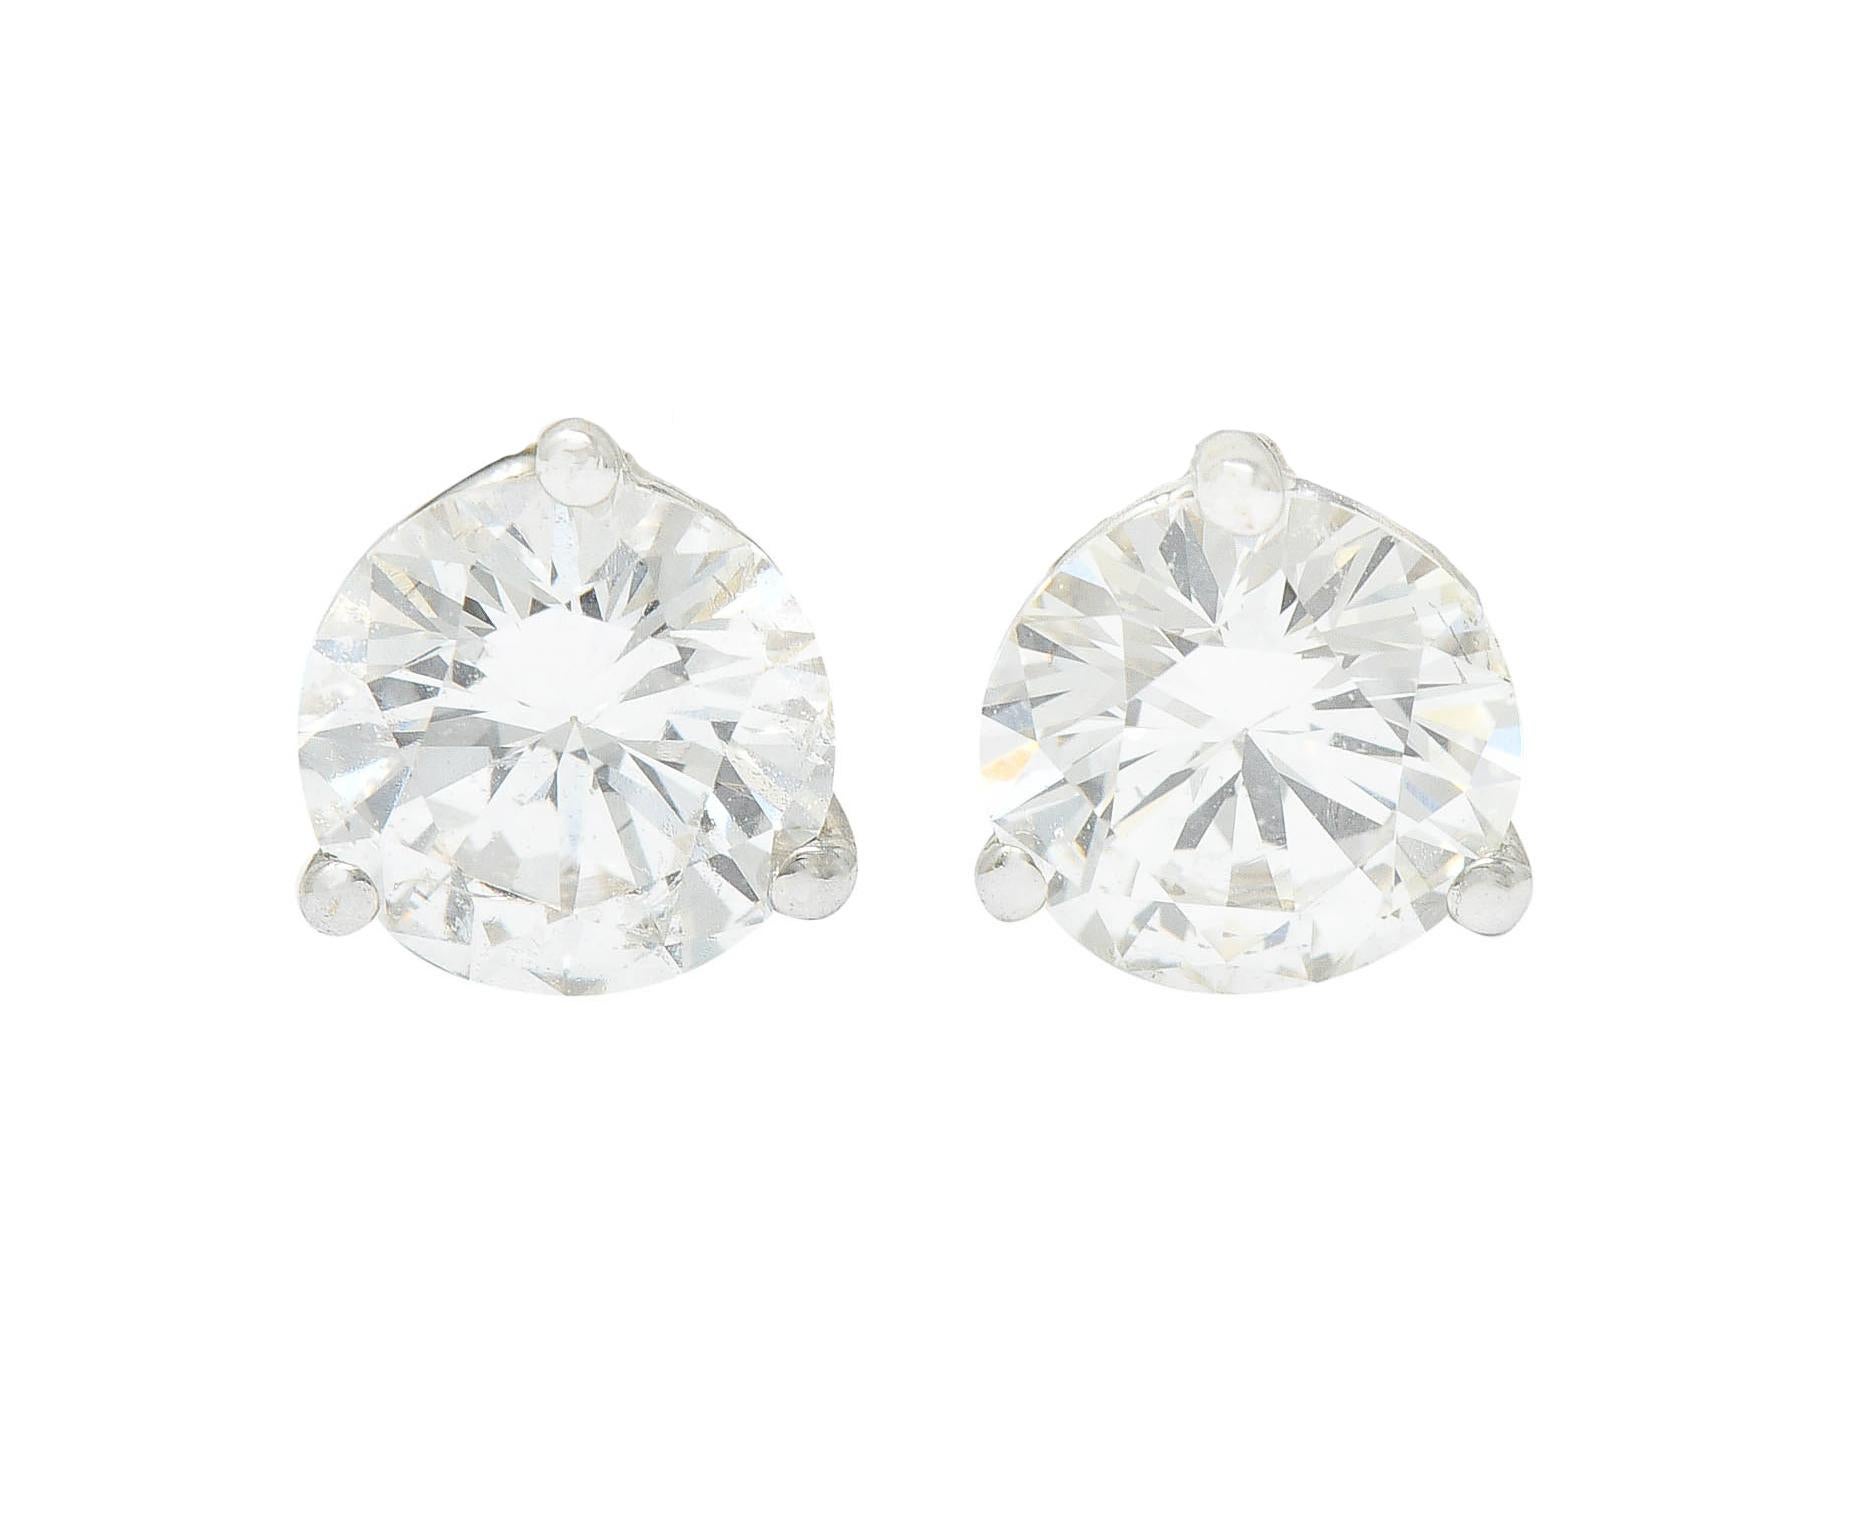 Featuring martini basket stud earrings set with round brilliant cut diamonds

Weighing in total approximately 1.20 carats with I/J color and SI clarity

Completed by threaded posts and screw backs

With stud enhancers as a flange surmount that